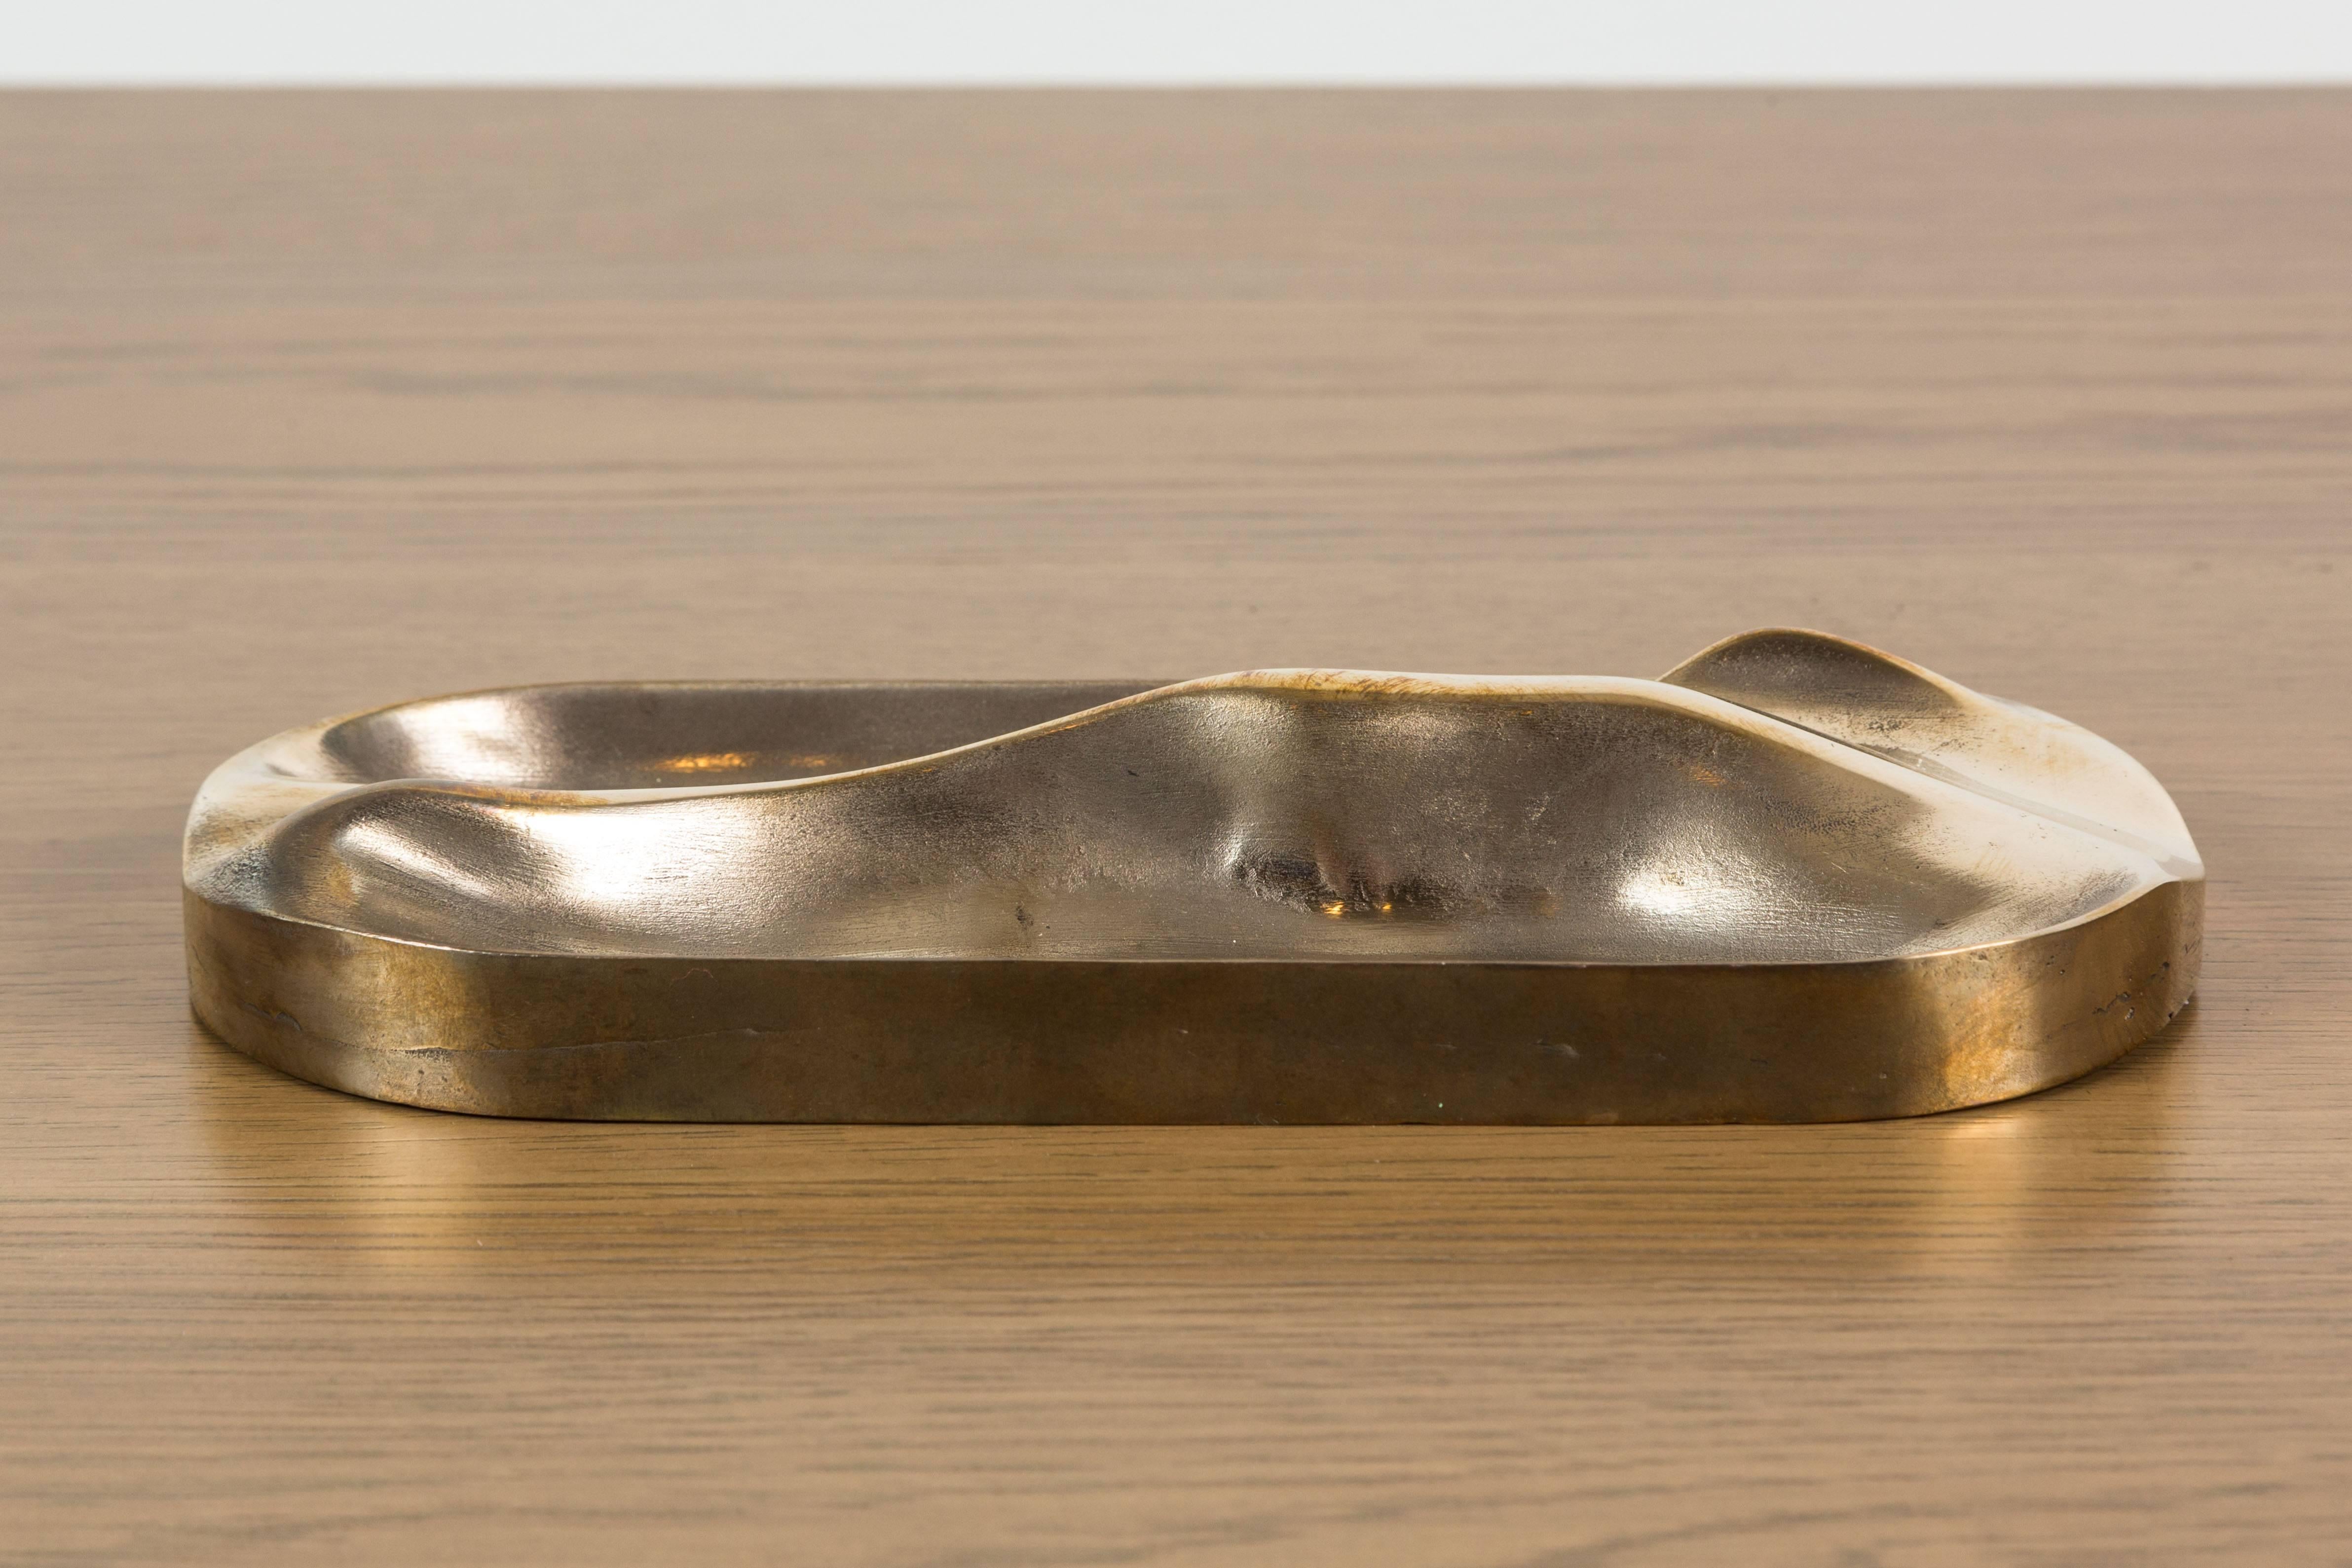 Mid-Century Modern Small Bronze Tray by Artist Vincent Pocsik for Lawson-Fenning